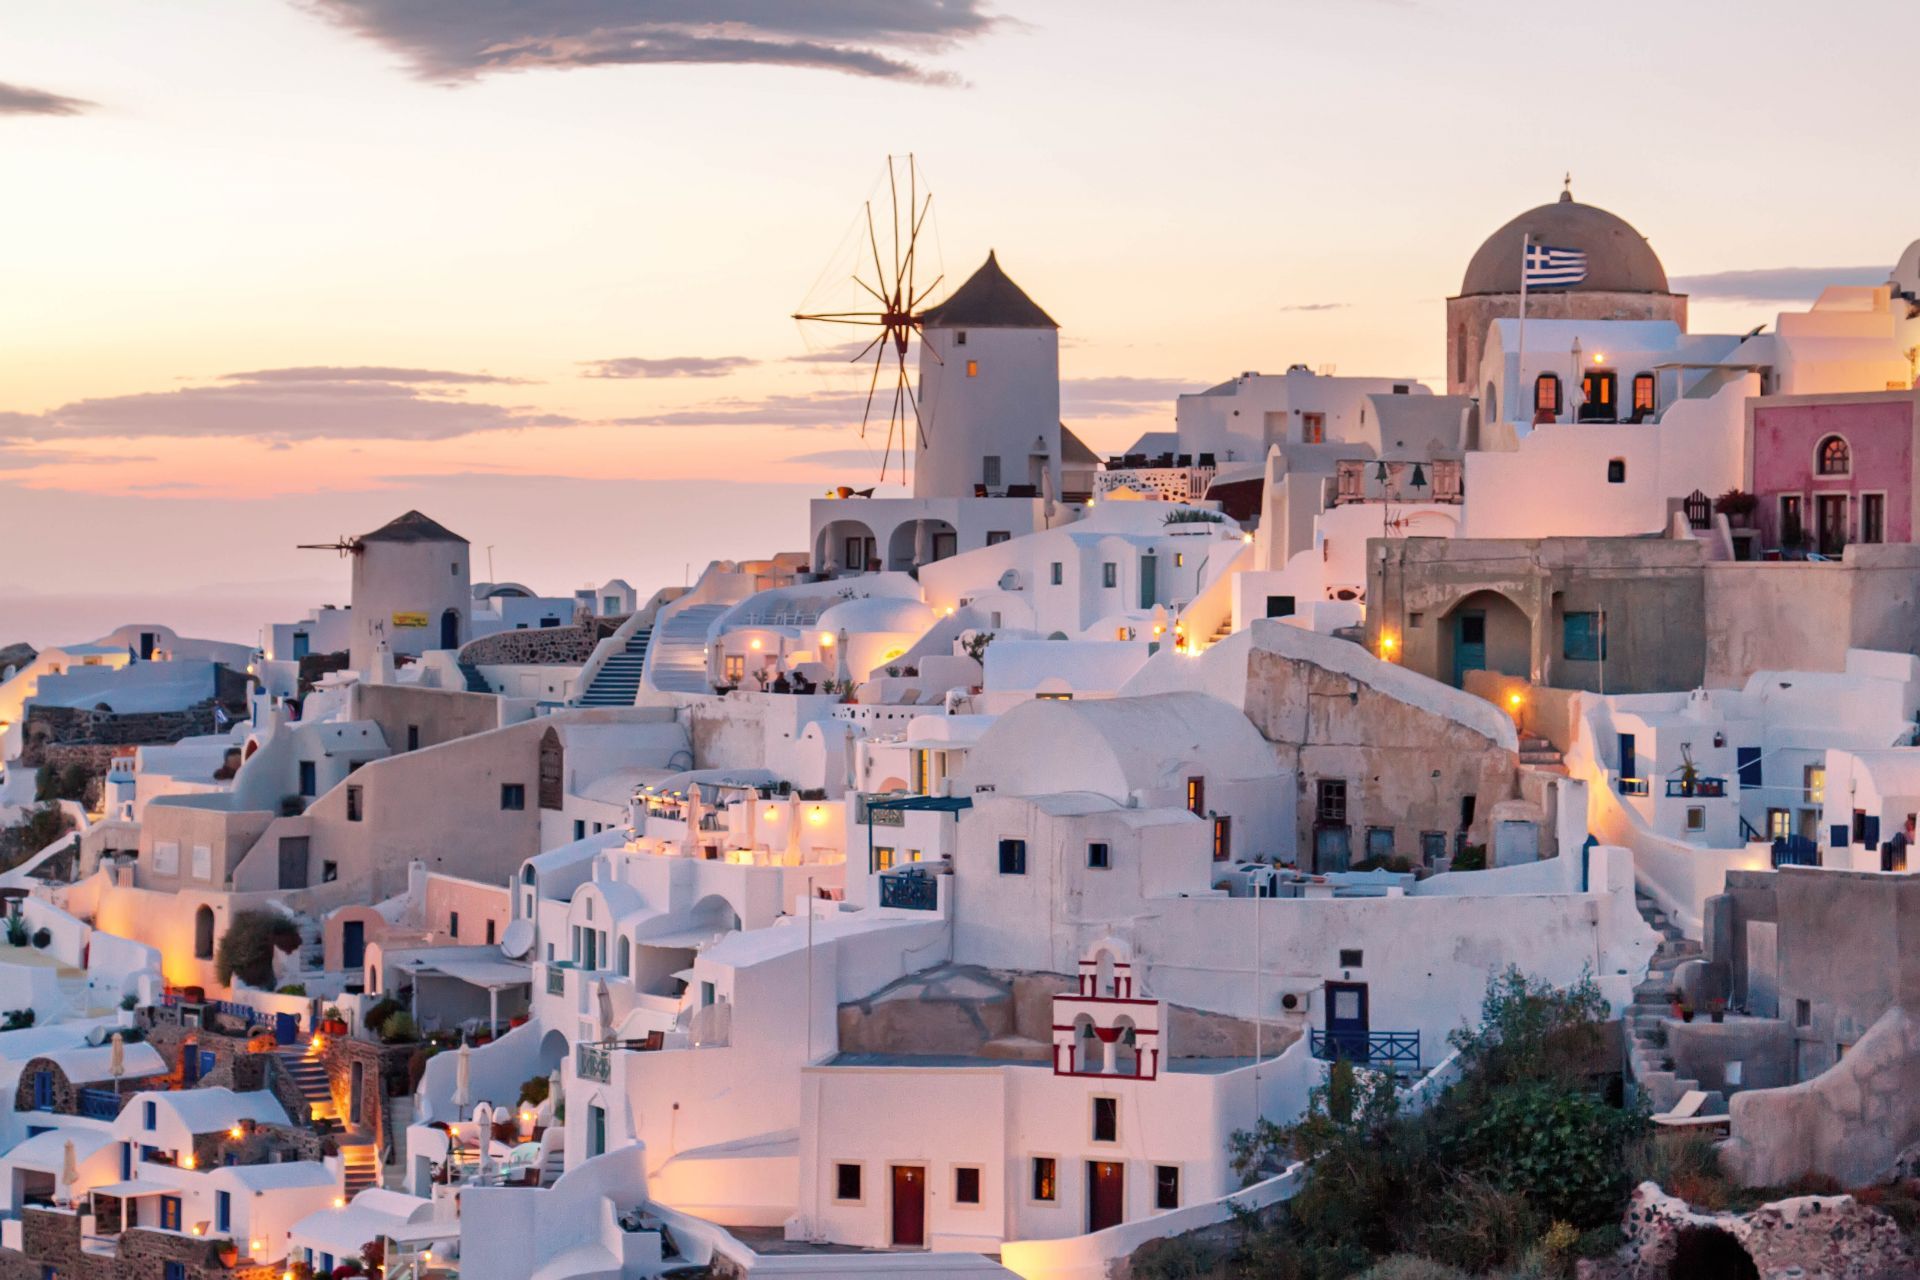 tour to mykonos and santorini from athens